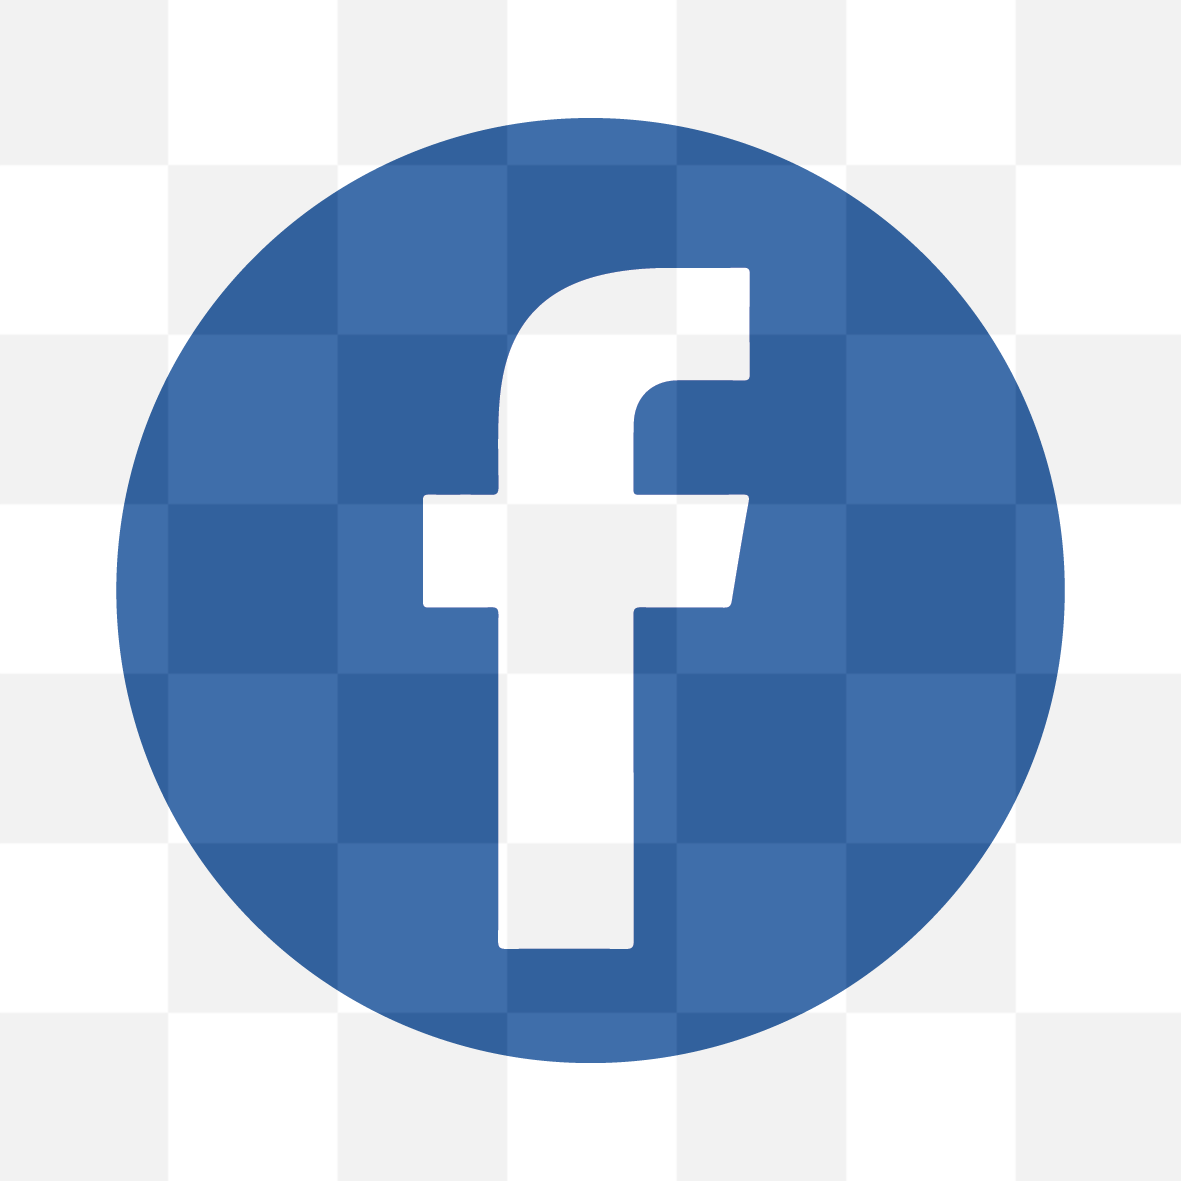 1181 x 1181 px | Facebook logo PNG. Download Facebook icons in multiple...